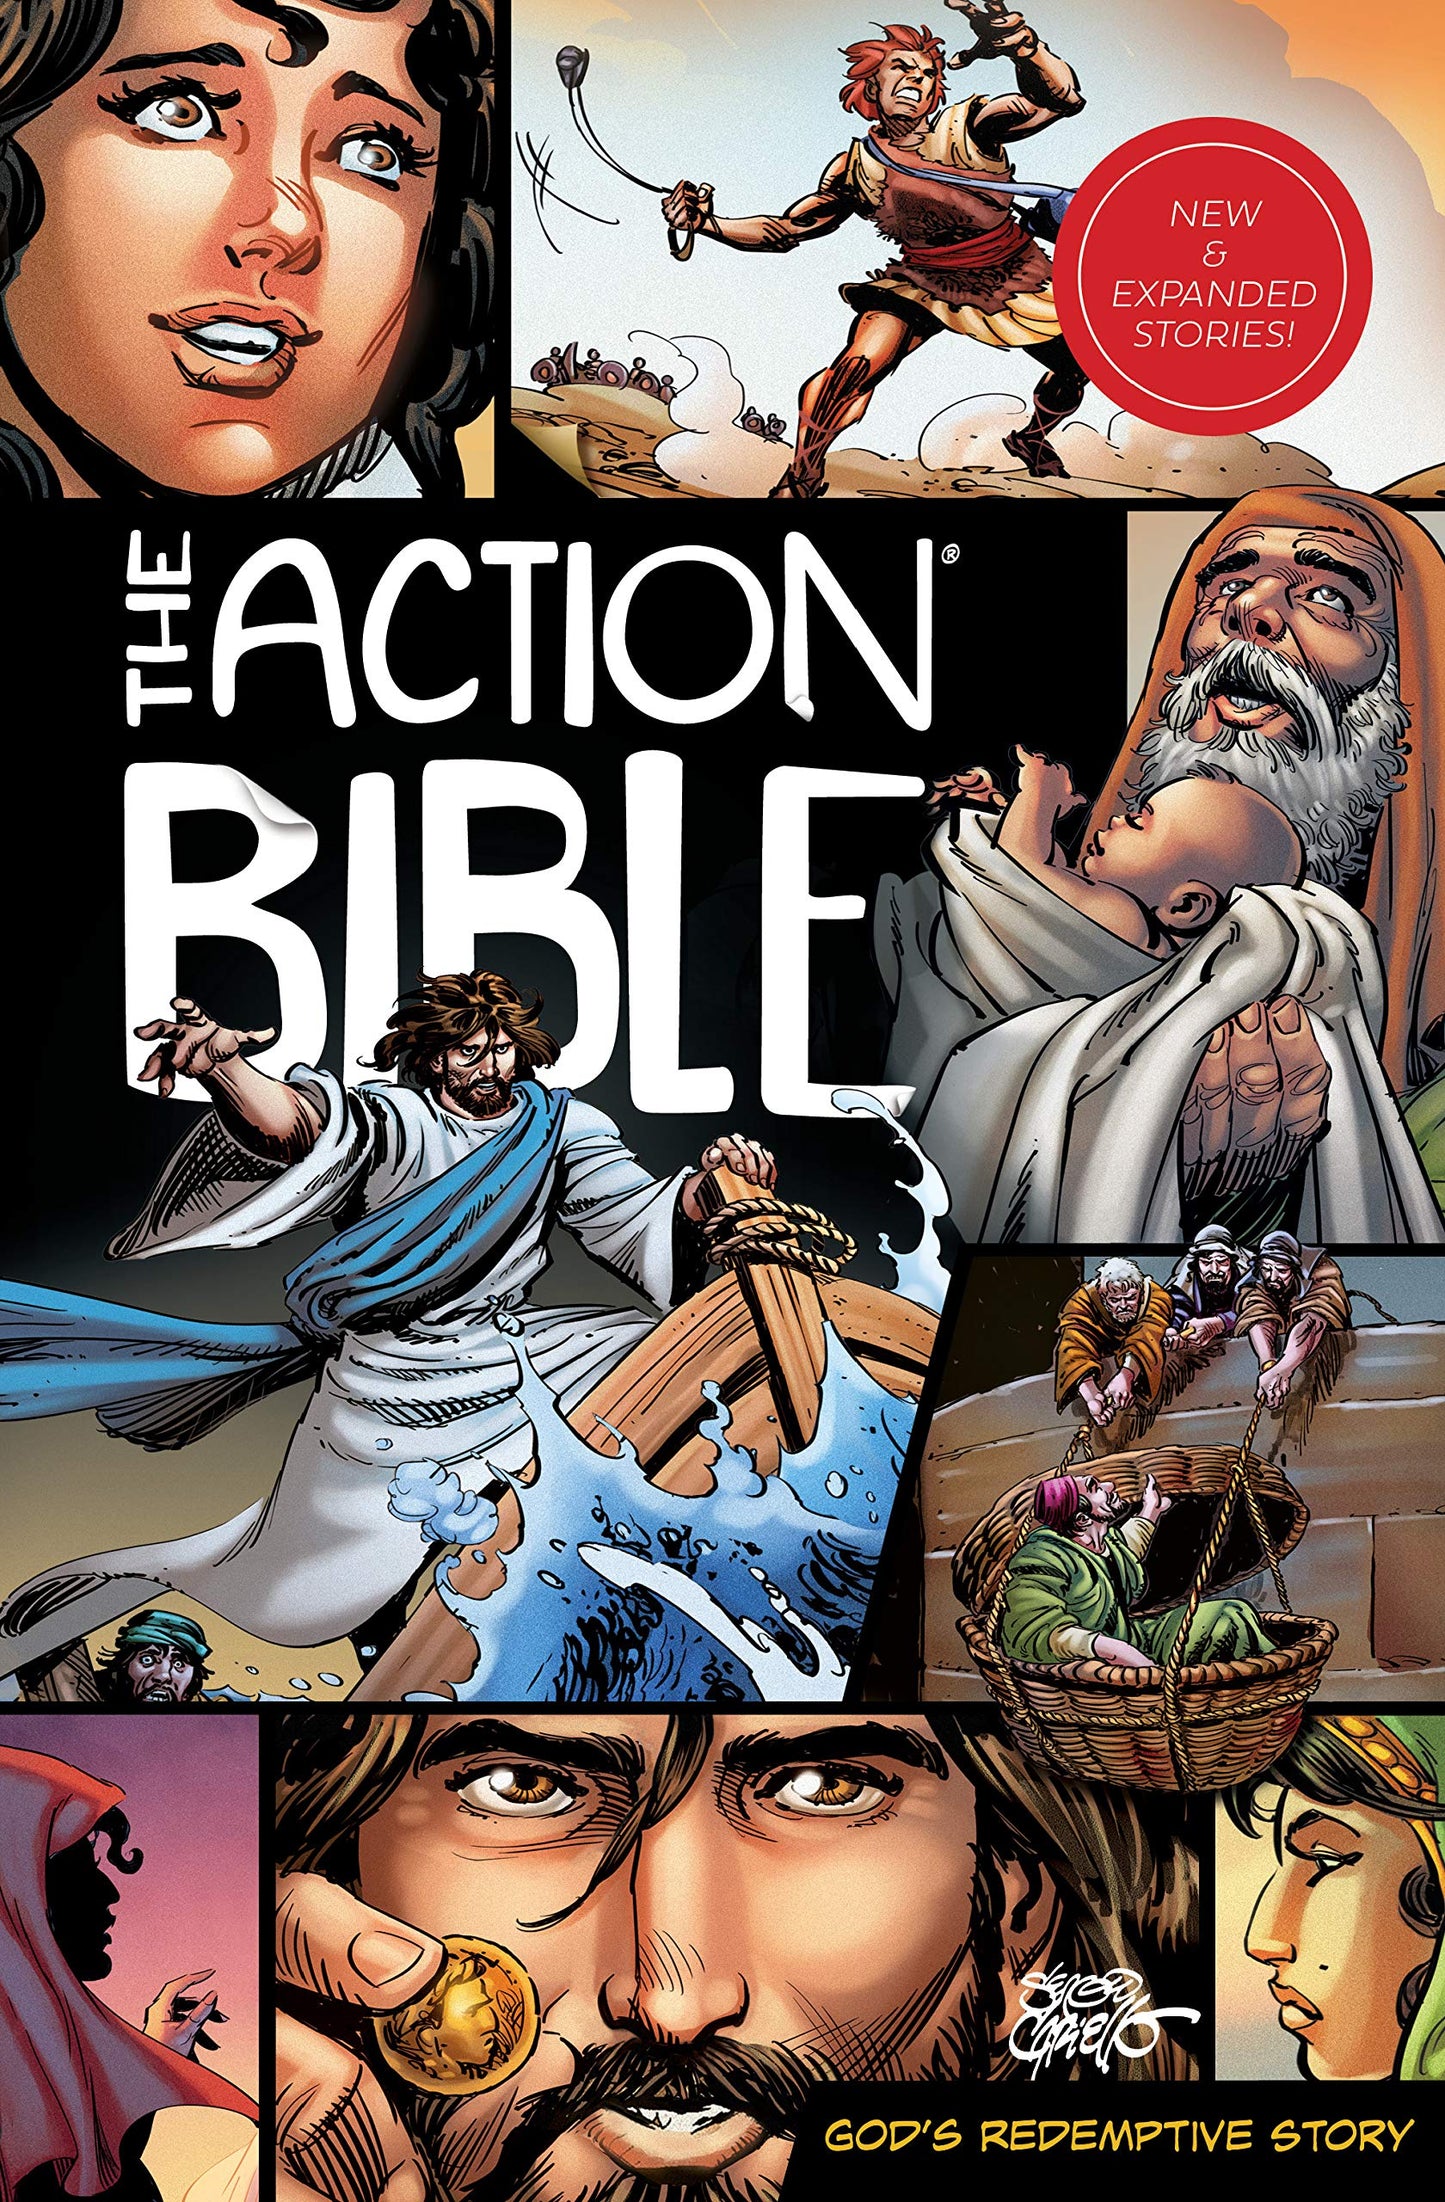 Action Bible New & Expanded Stories by Sergio Cariello